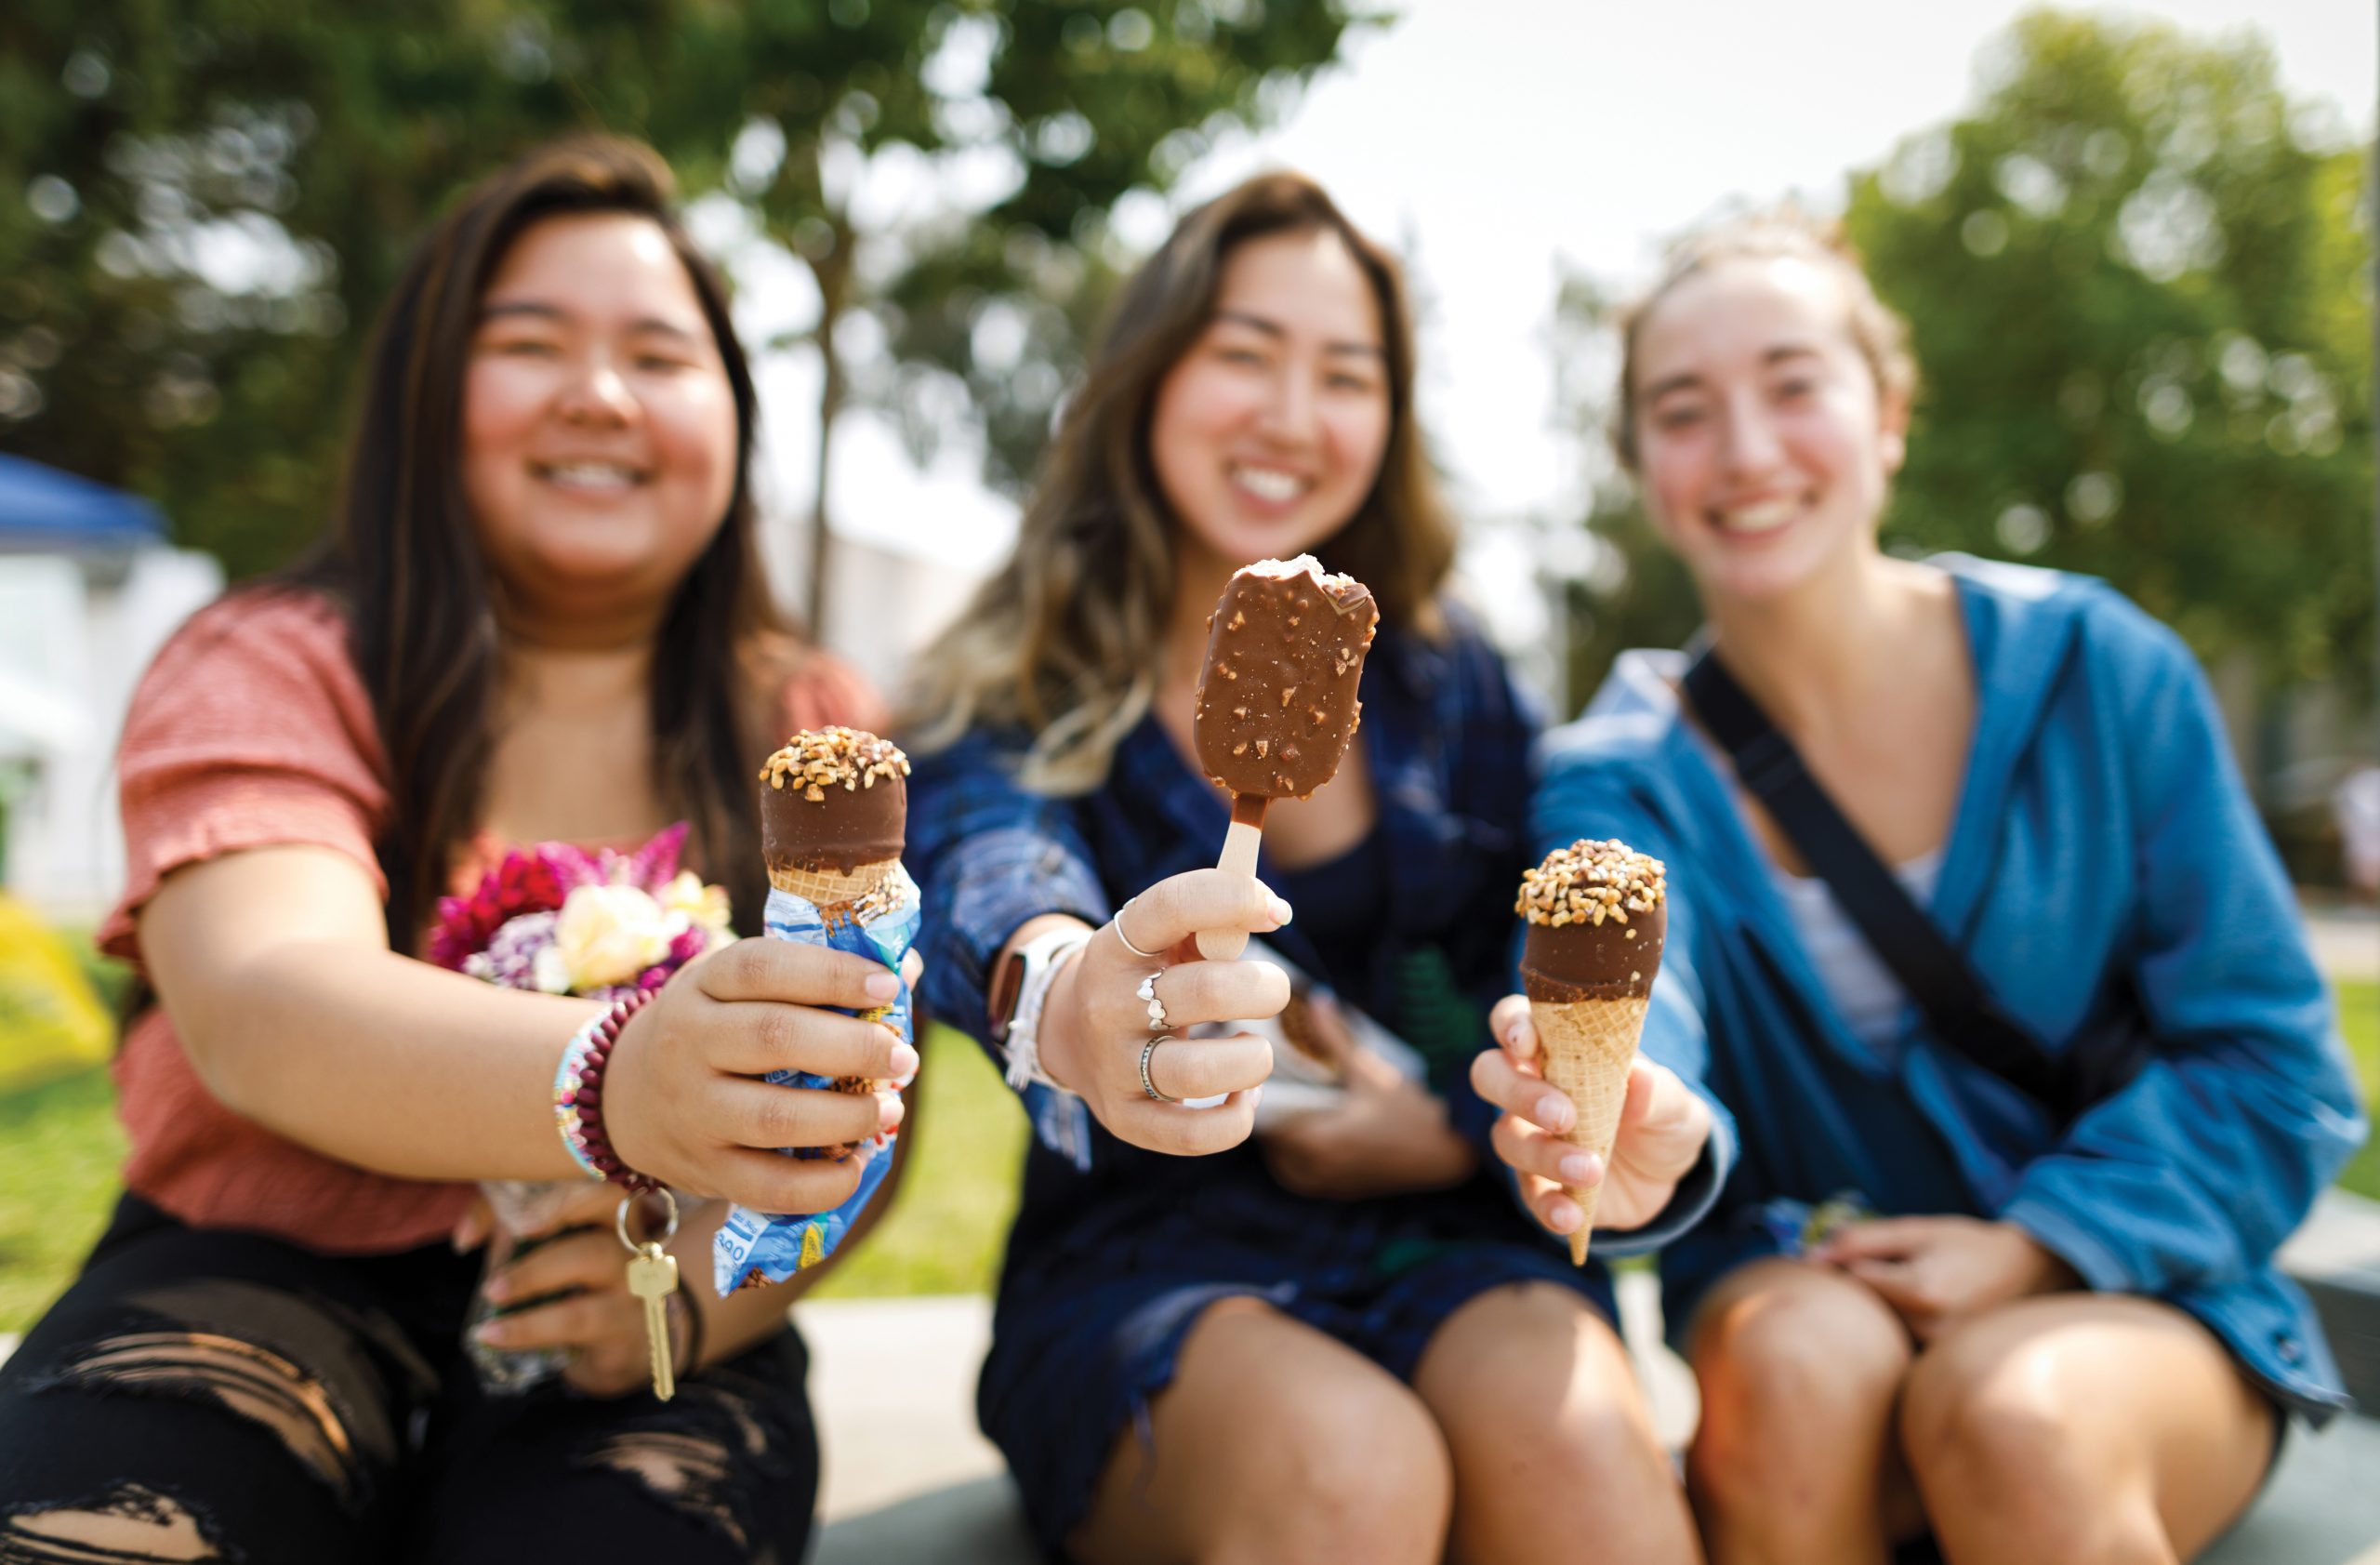 Three young women smile for the camera as they hold ice cream bars out in front of them